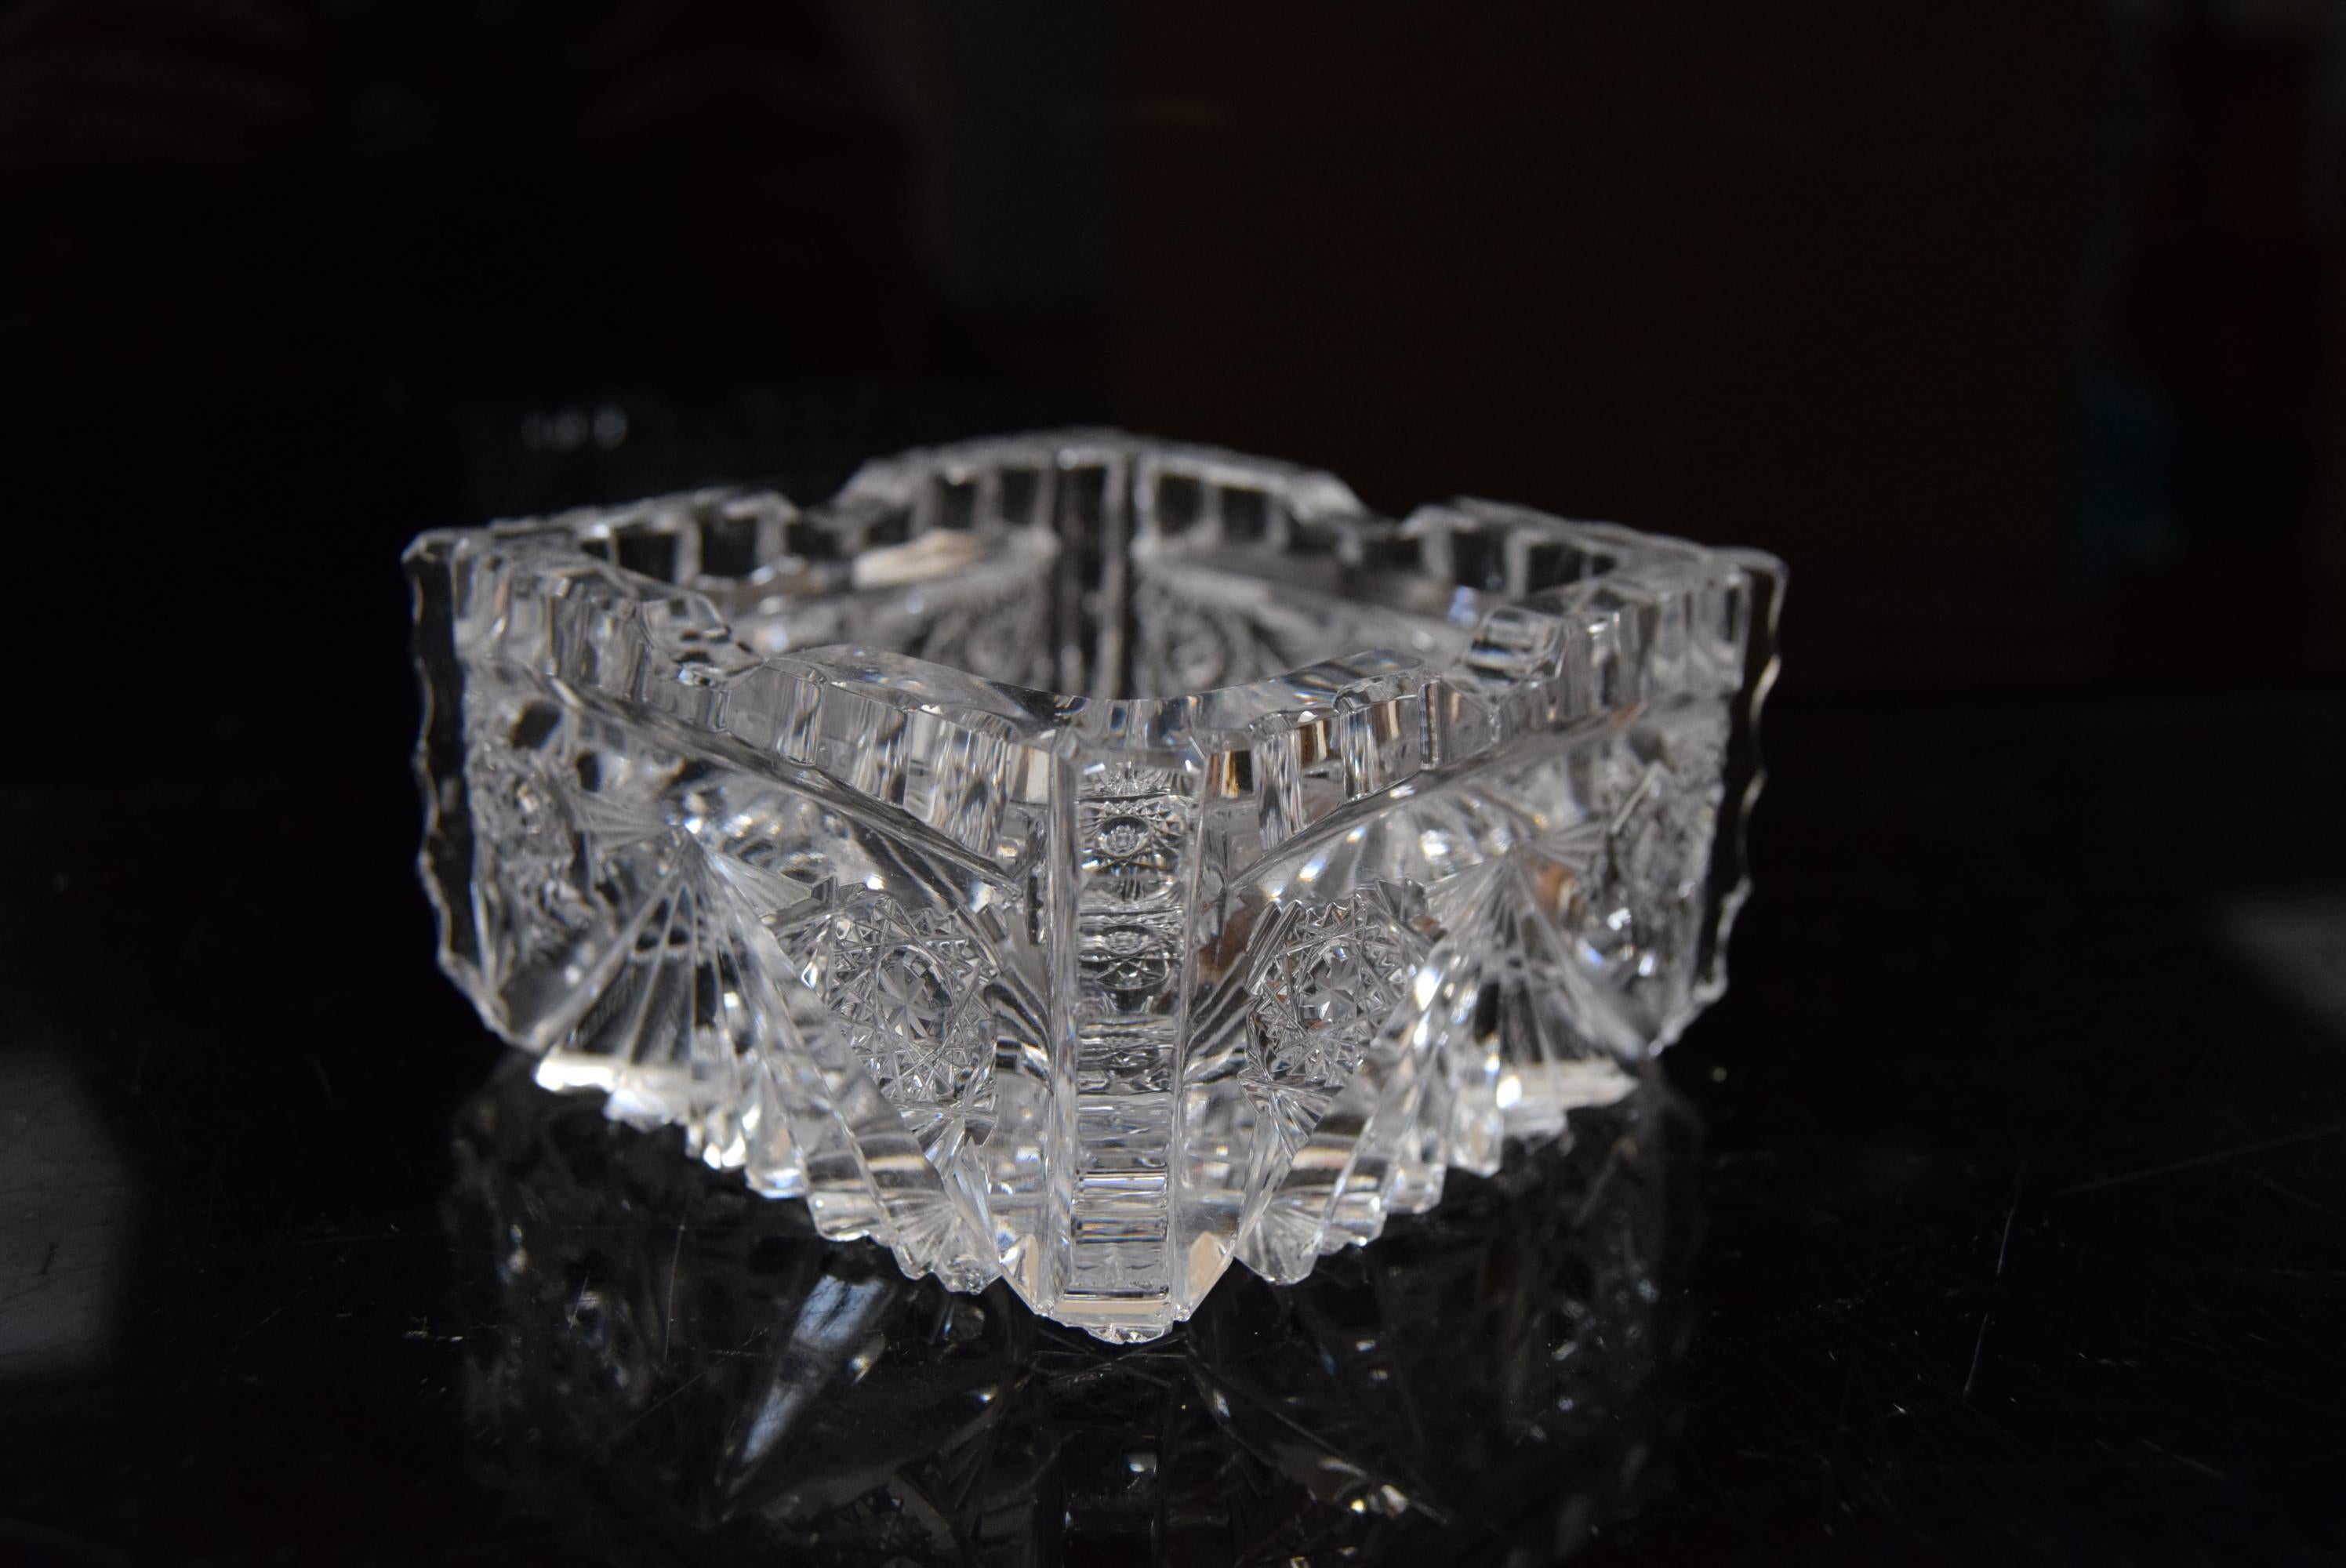 Pair of Rare Vintage Ashtrays, Cut Crystal Glass, Bohemia in the, 1960s For Sale 1